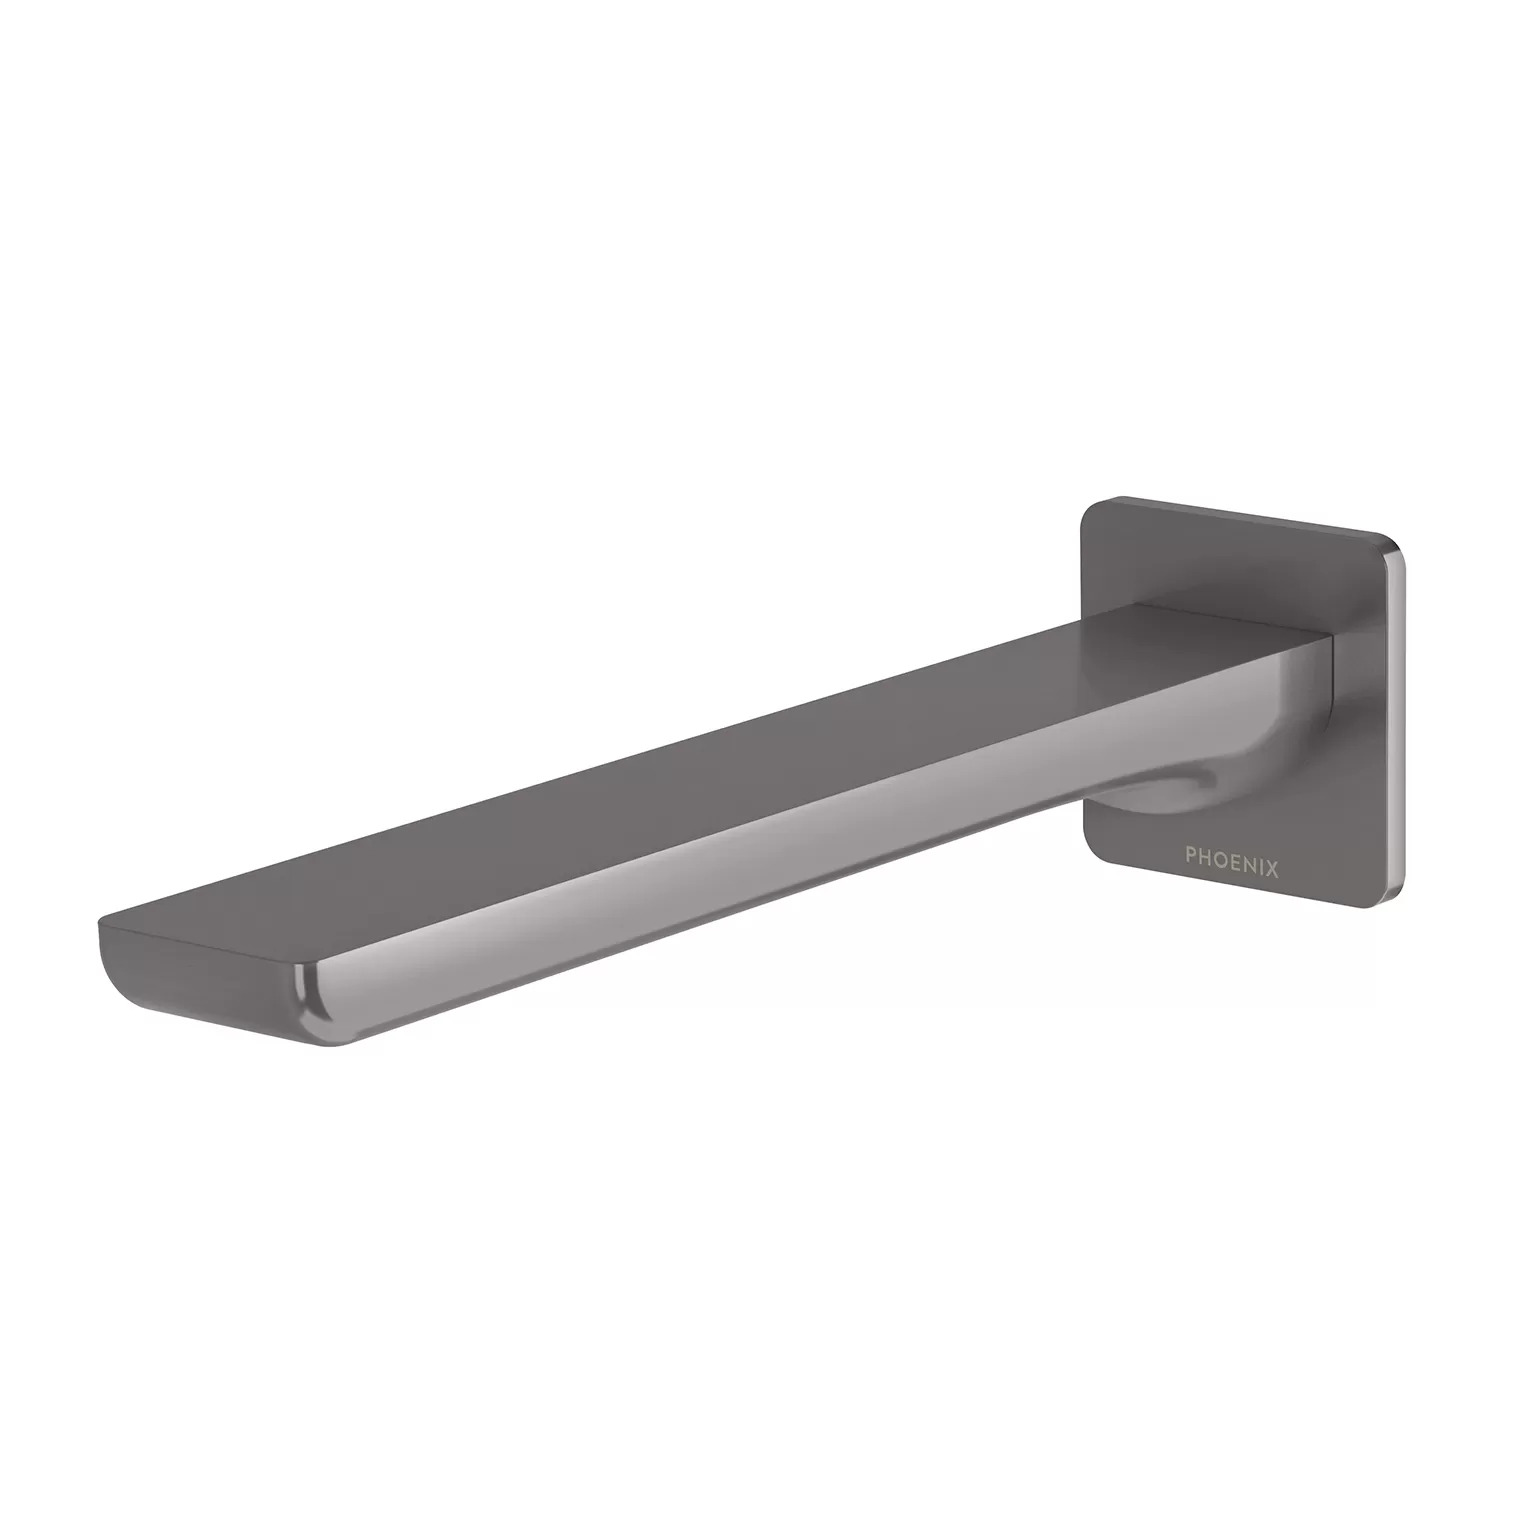 Phoenix Tapware Bathroom Wall Basin / Bath Outlet Spout Gloss MKII Brushed Carbon 135-7610-31